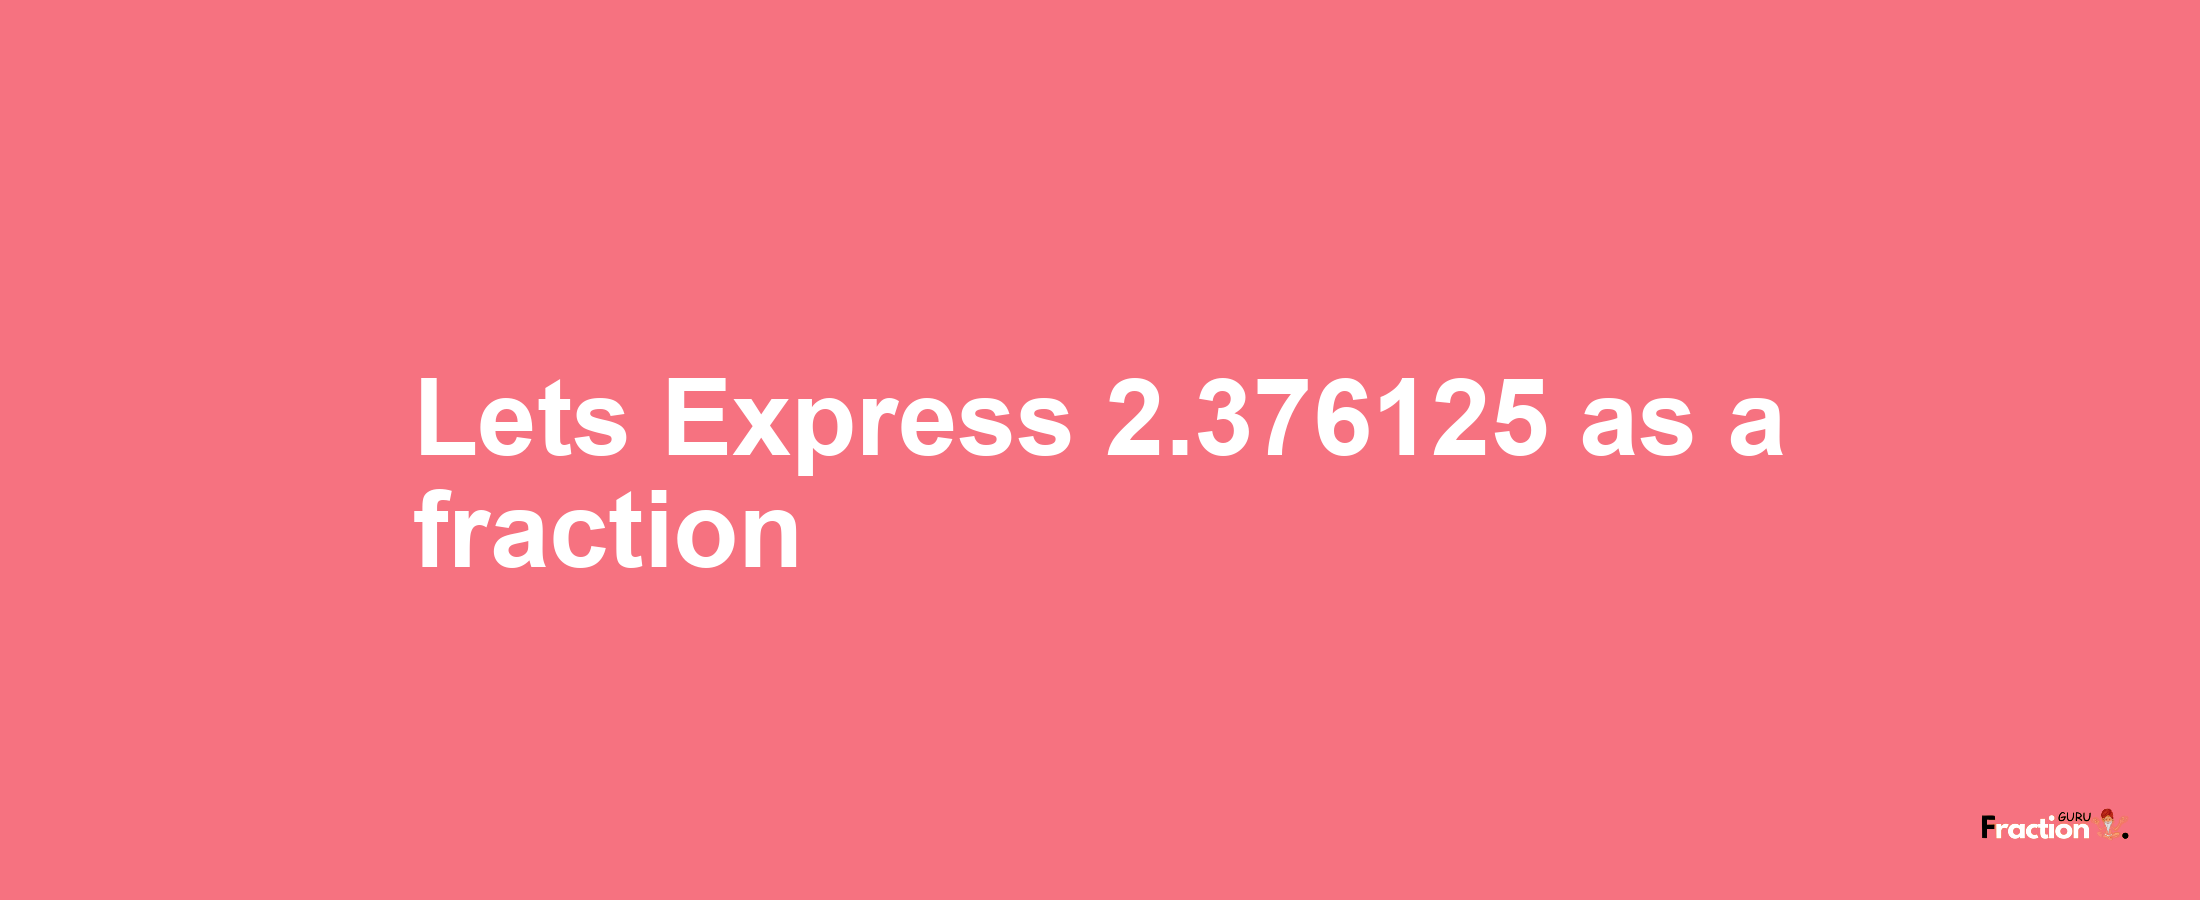 Lets Express 2.376125 as afraction